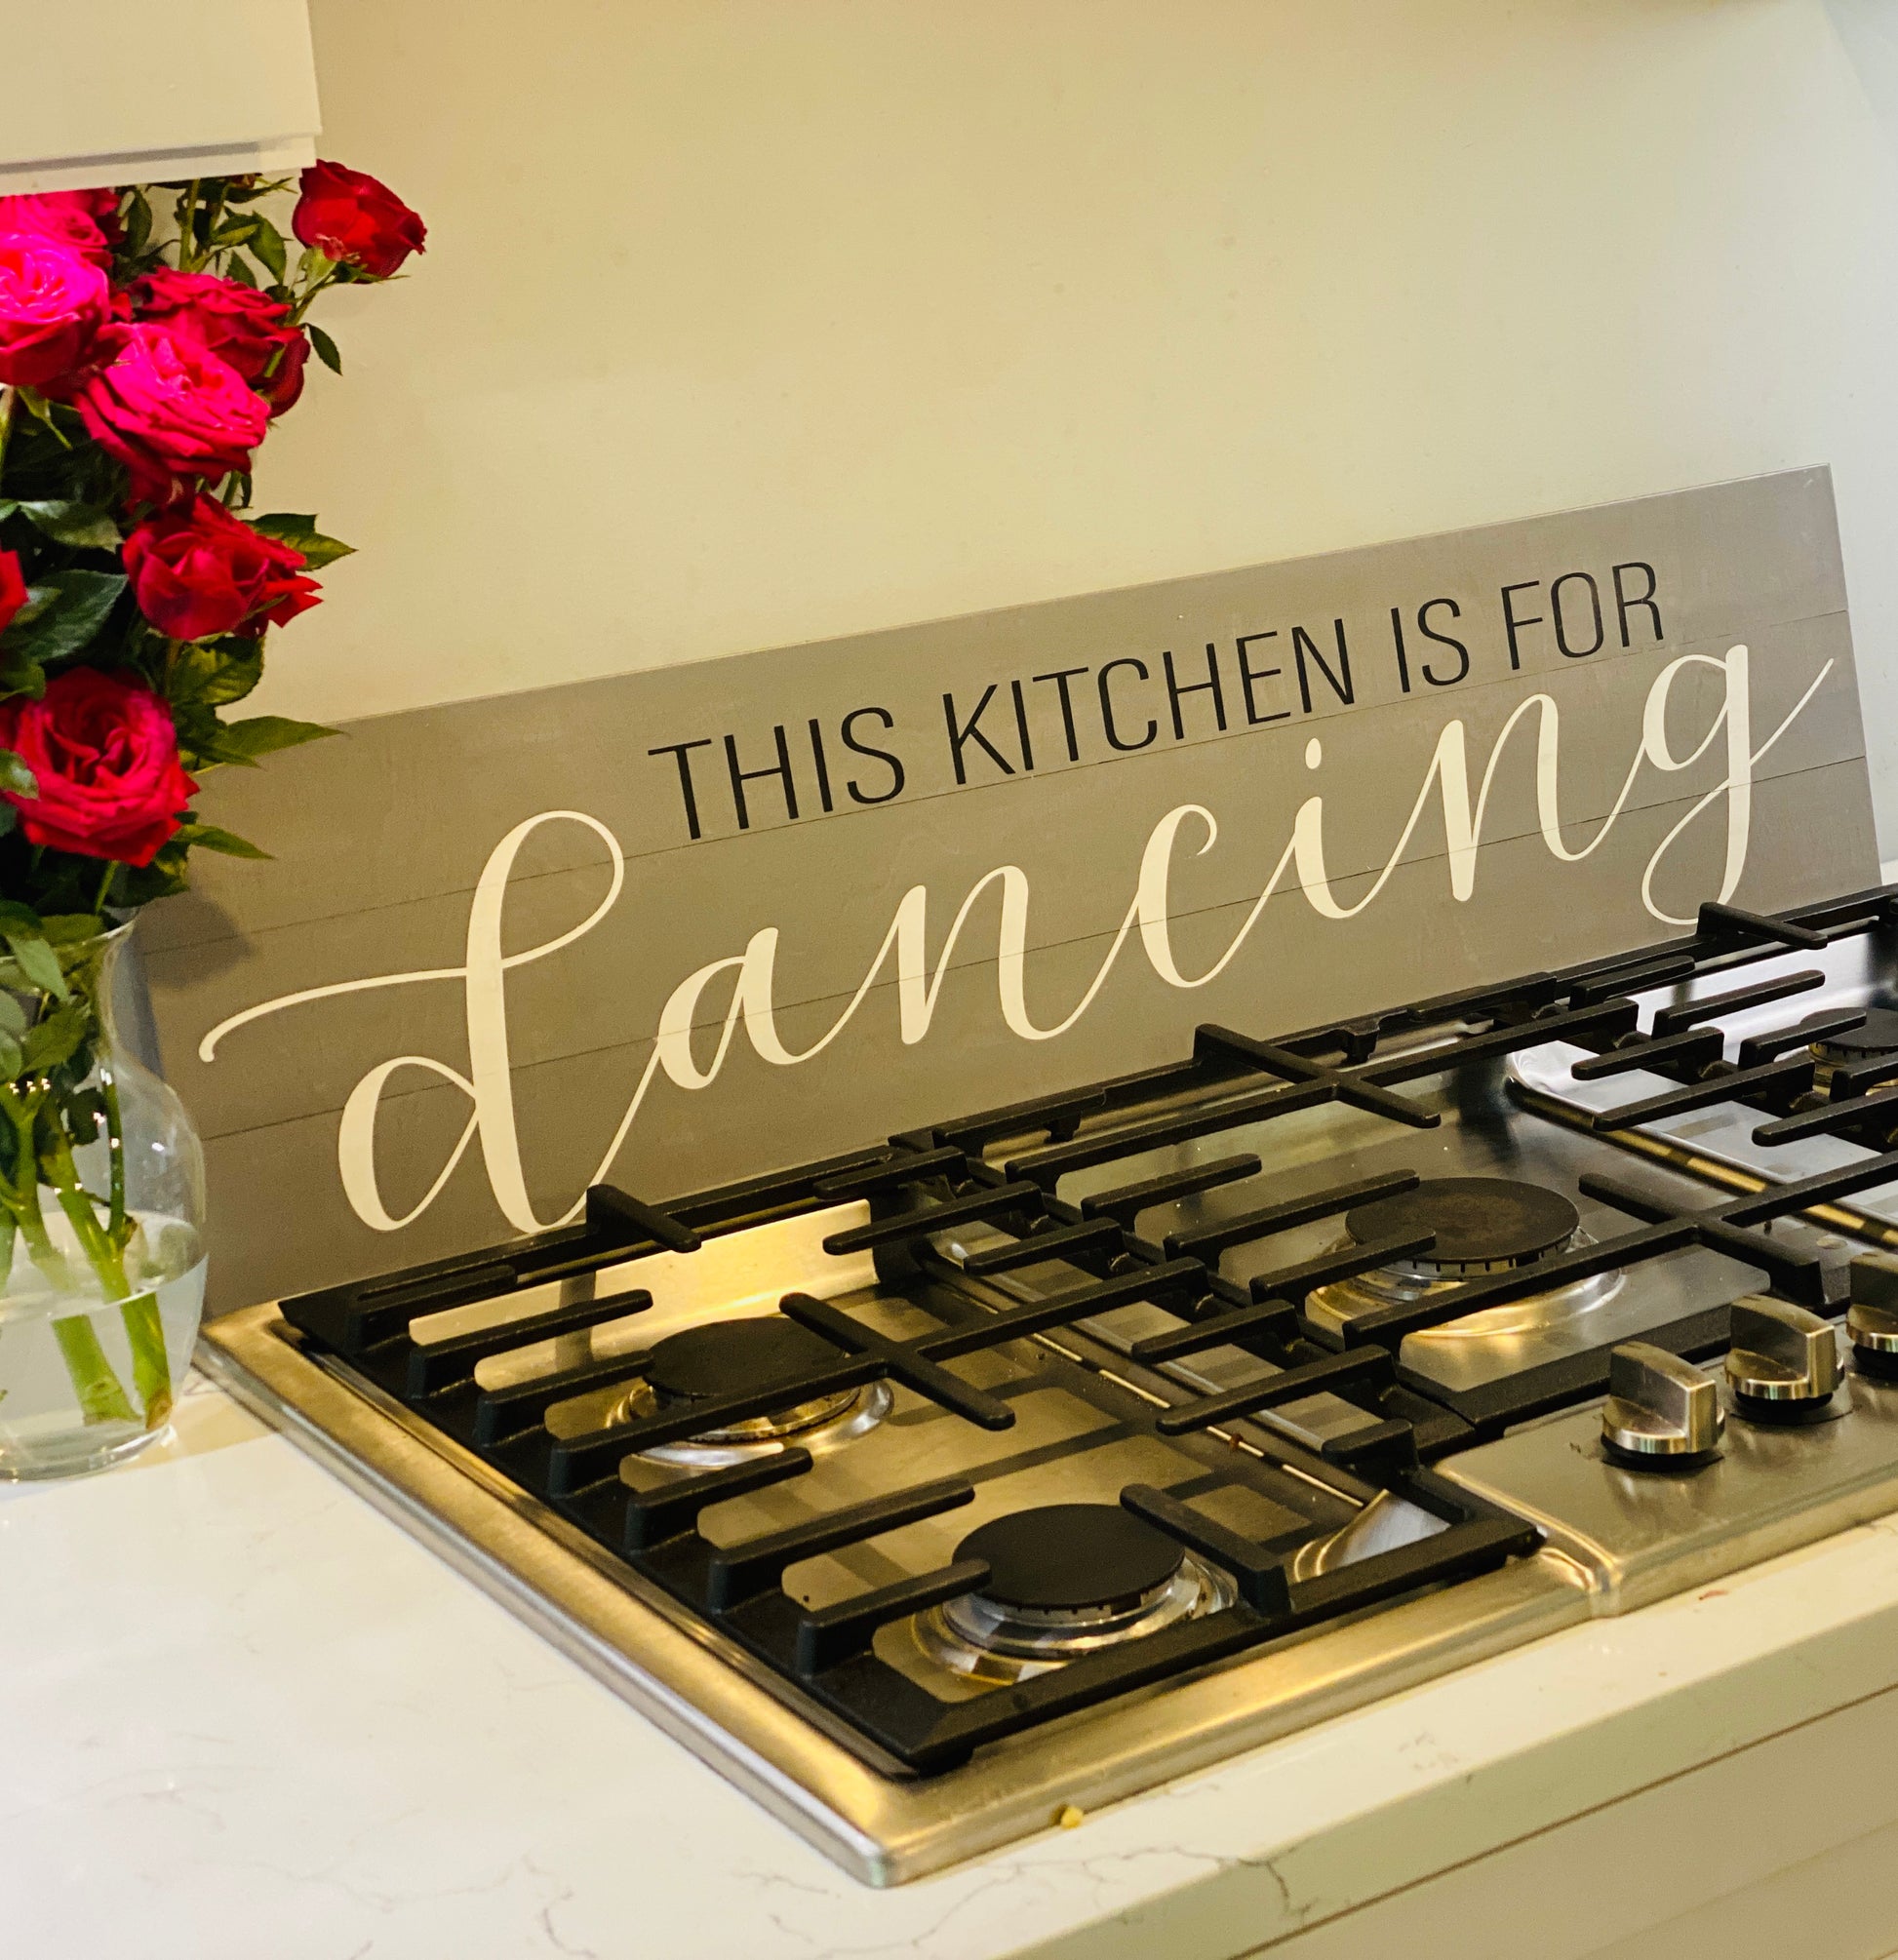 This kitchen is for Dancing: Plank Design - Paisley Grace Makery